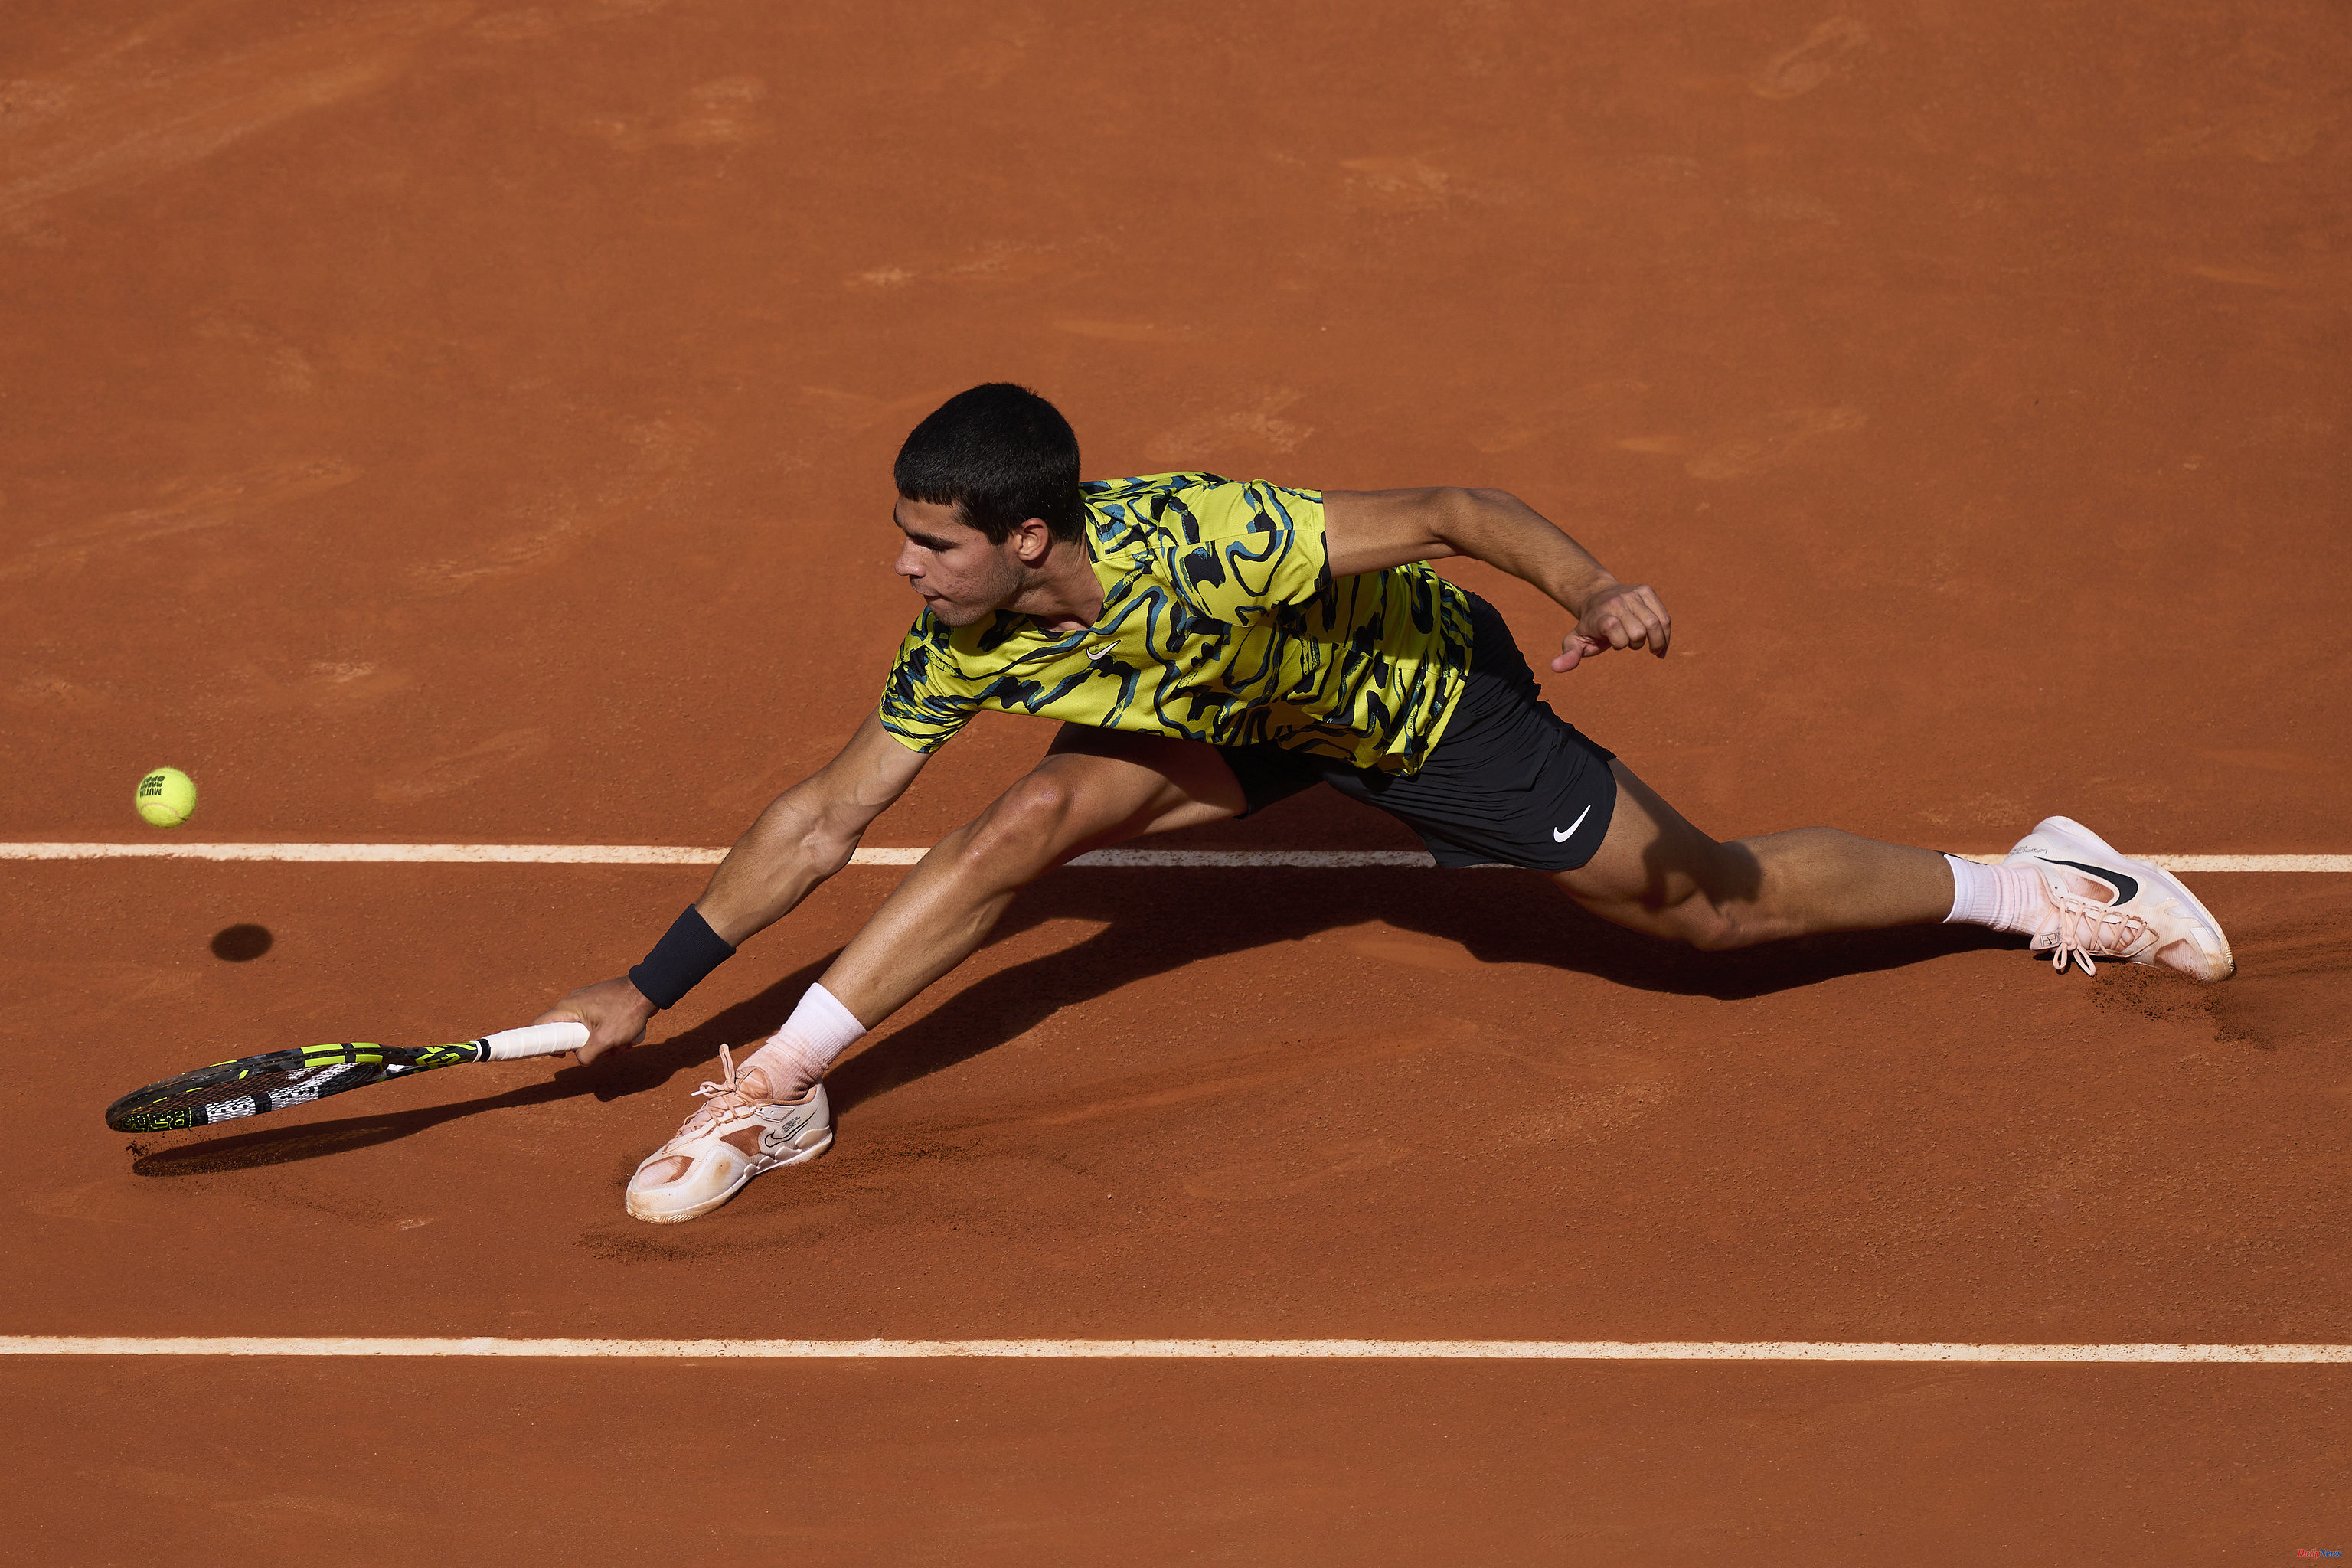 Television Alcaraz - Cobolli: Schedule and where to watch the Roland Garros match on TV today